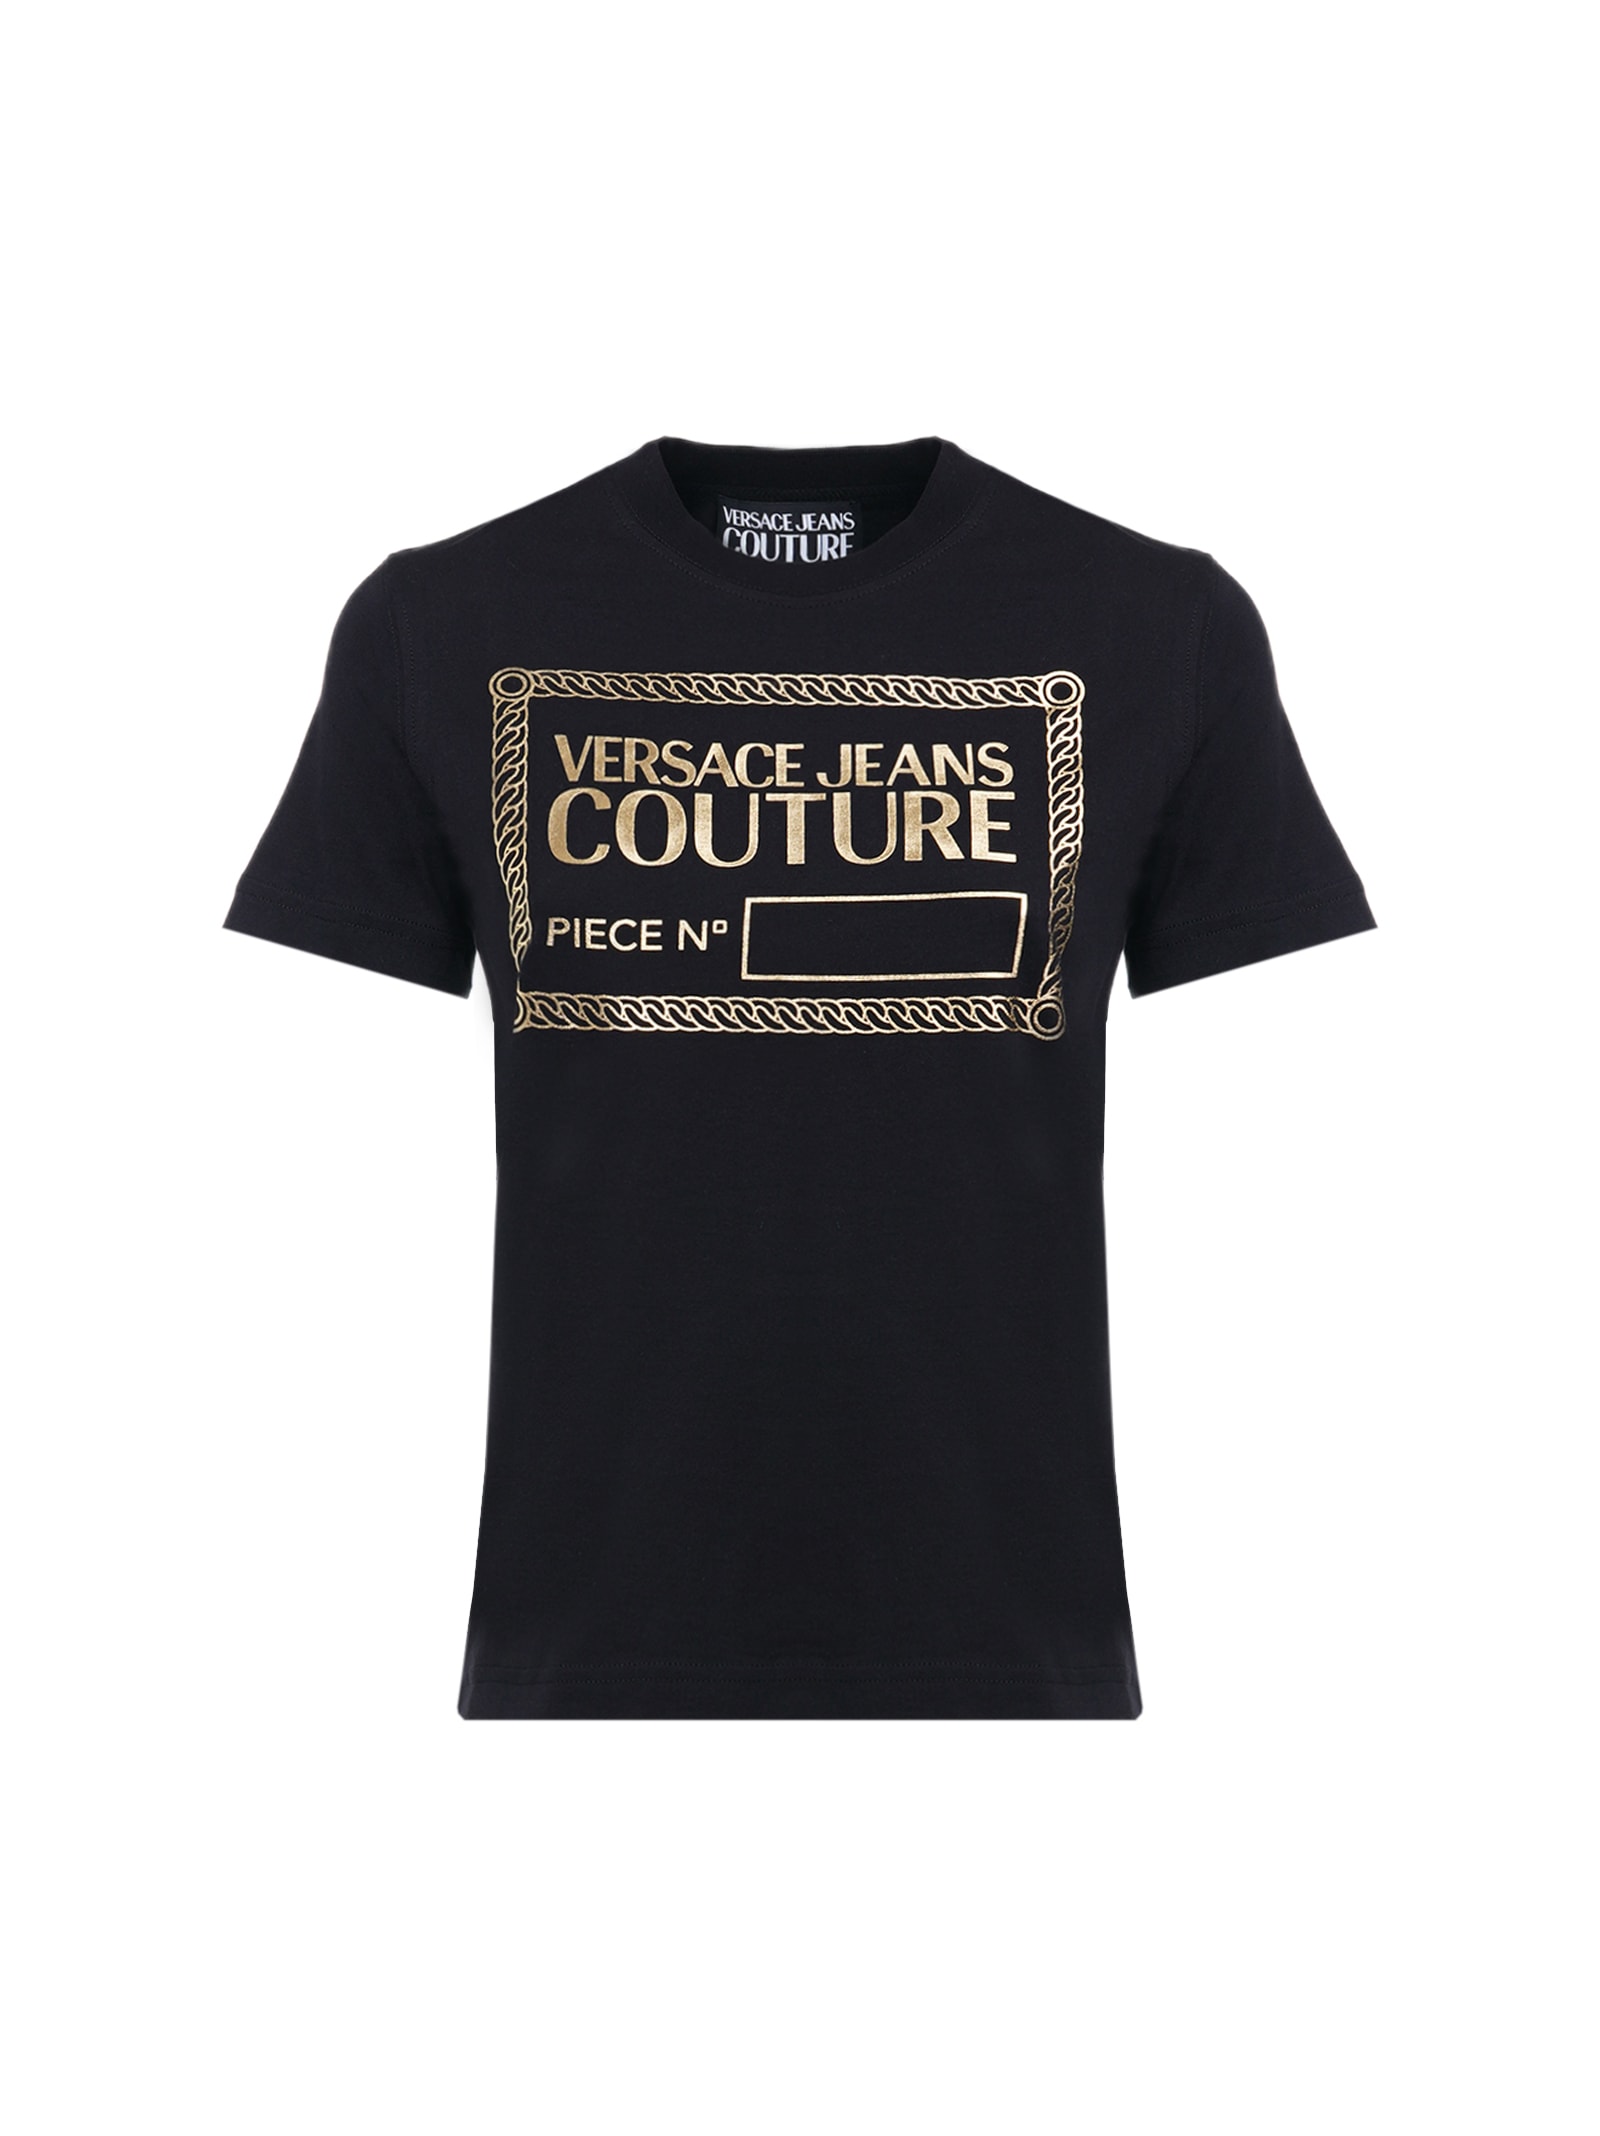 Versace Jeans Couture T-shirt With Nr Piece Lamina Print